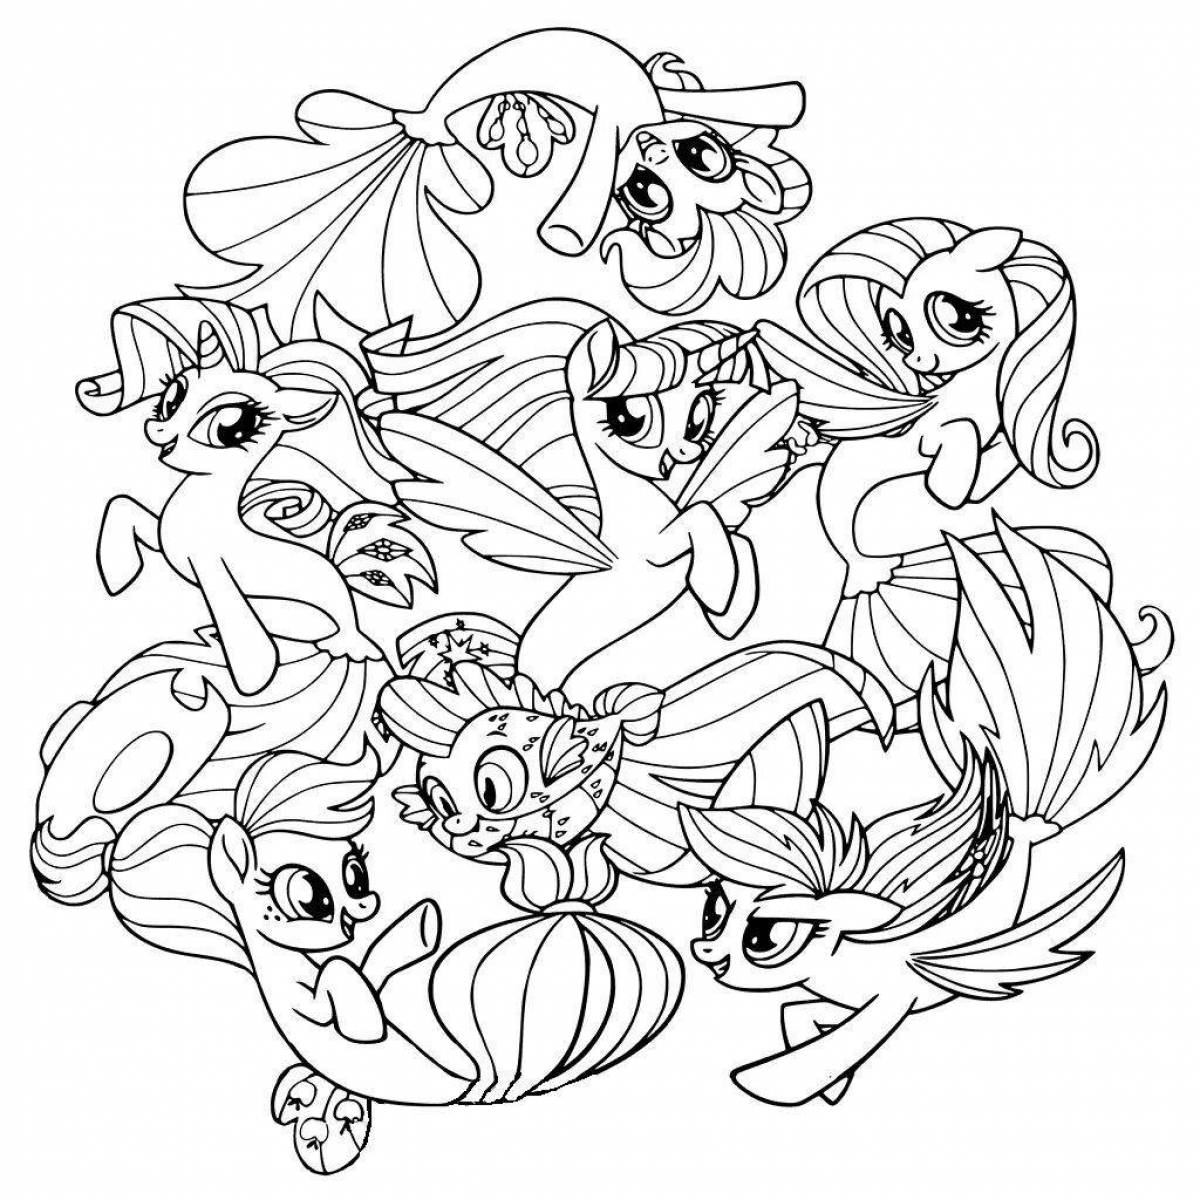 My little pony wonderful coloring book